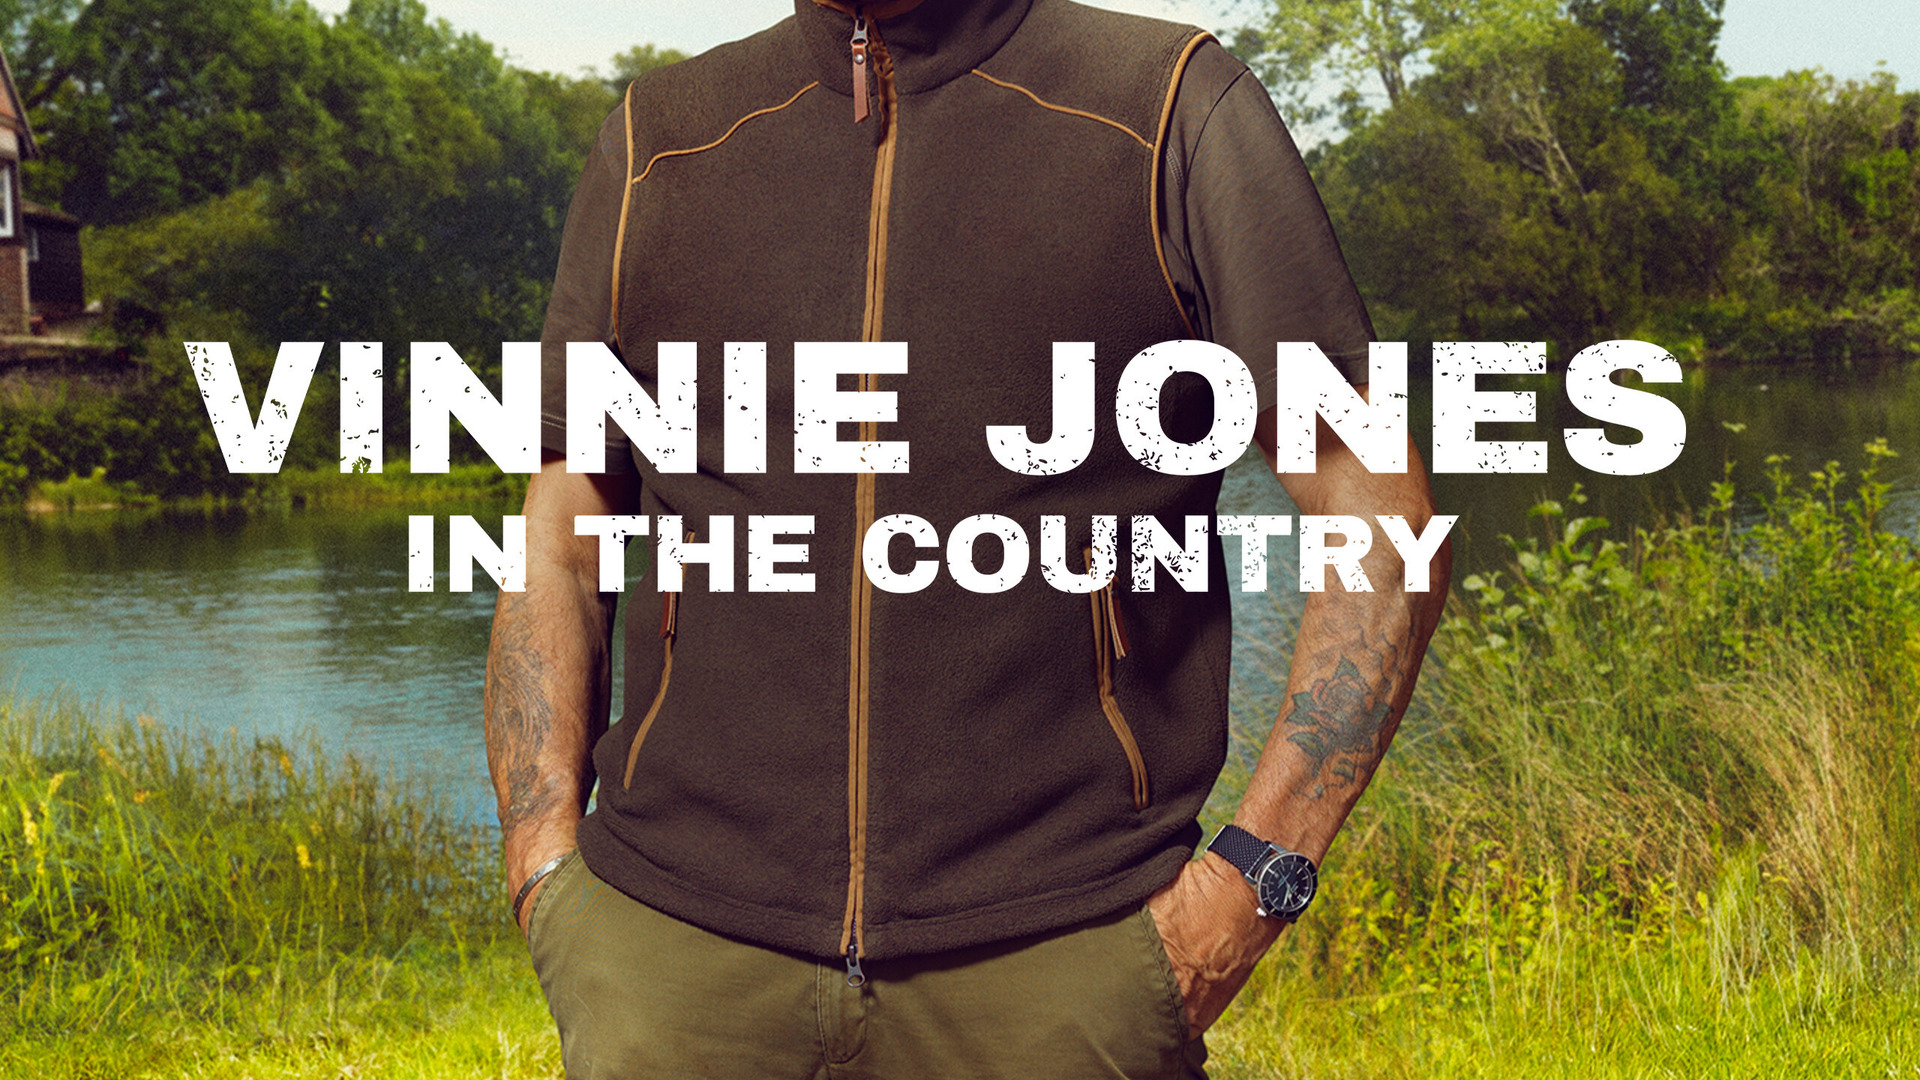 Show Vinnie Jones in the Country